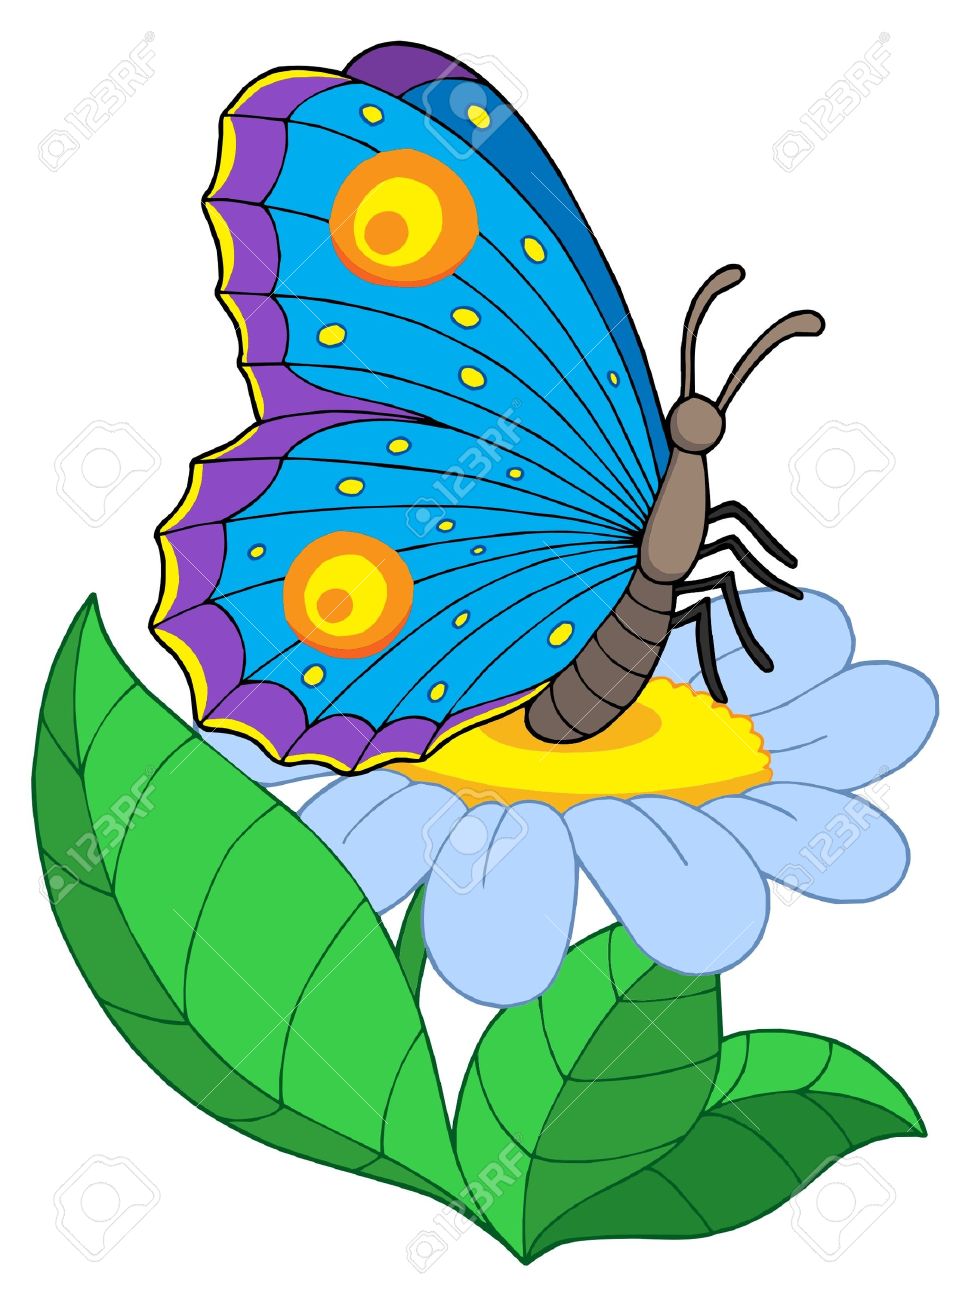 clipart of flowers and butterflies - photo #35